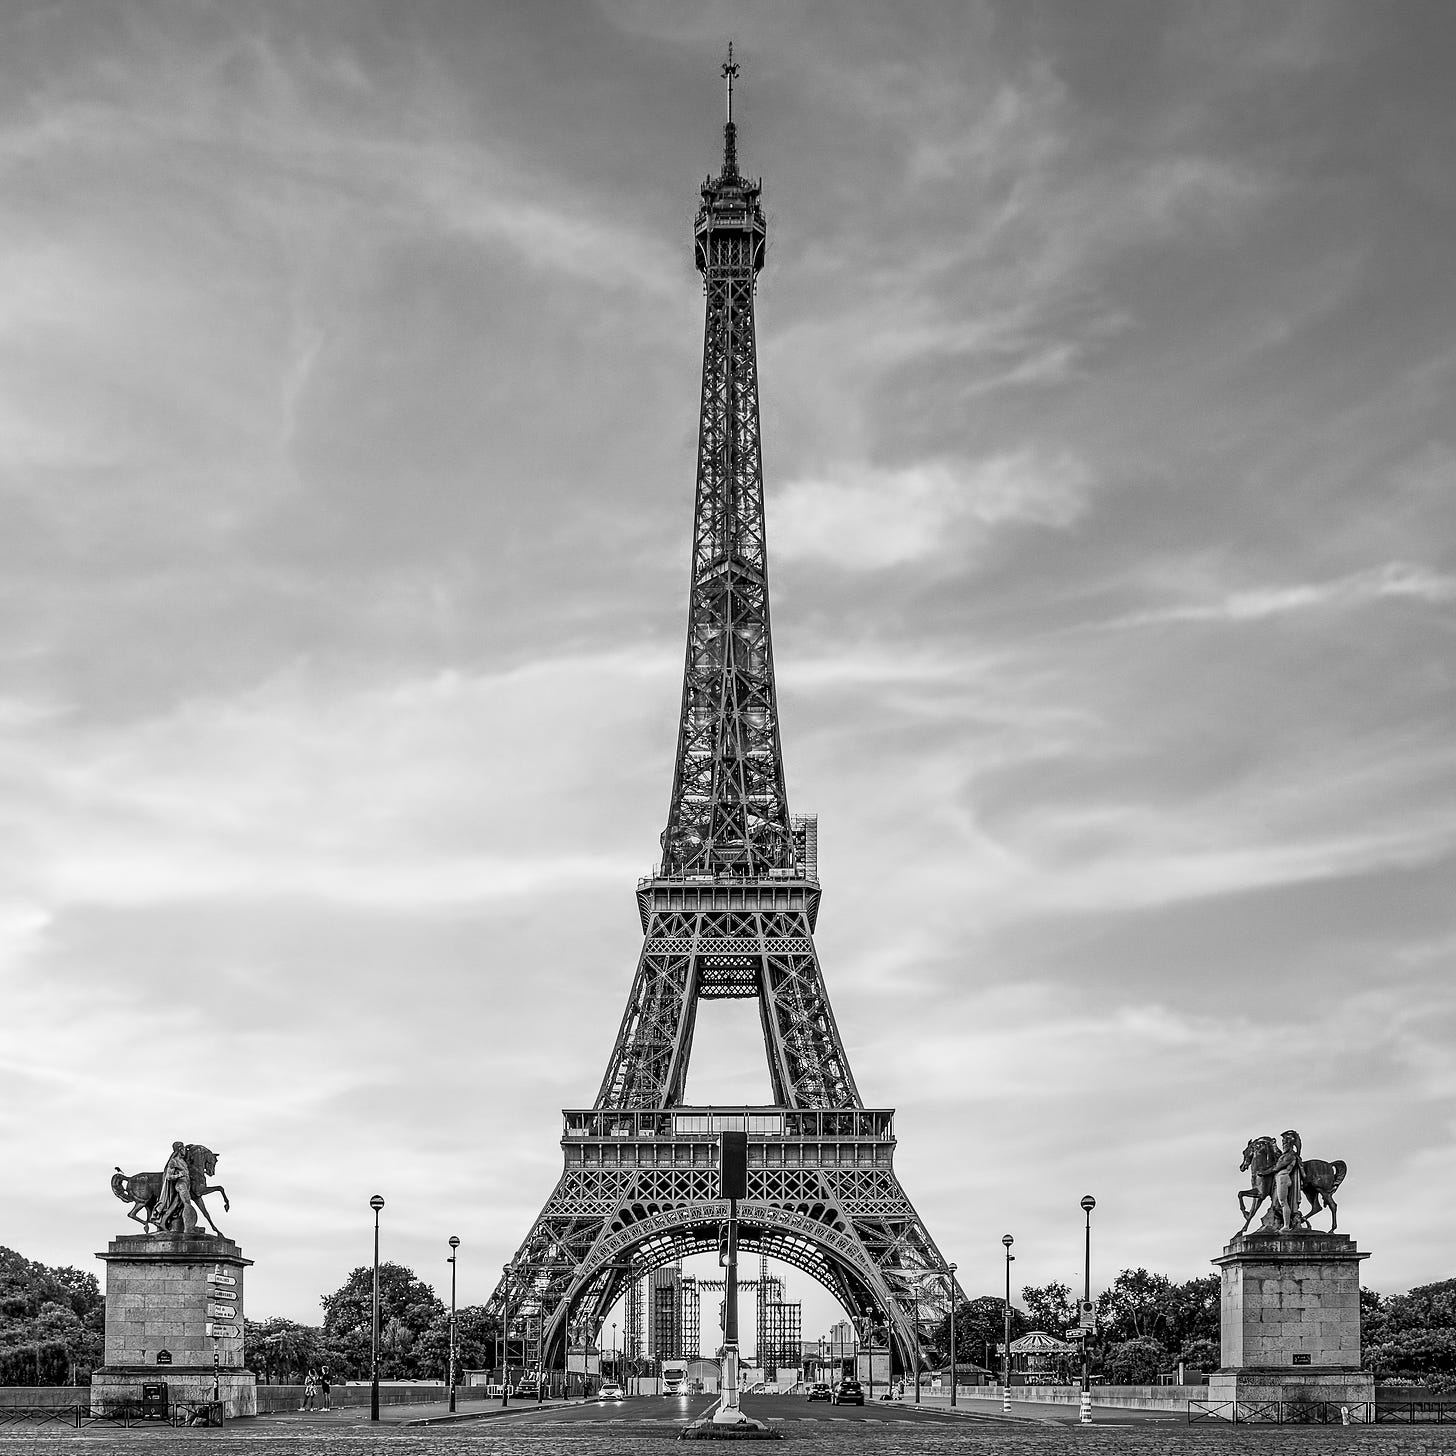 Black and white photo of the Eiffel Tower in Paris, France, taken from street level in the early morning.